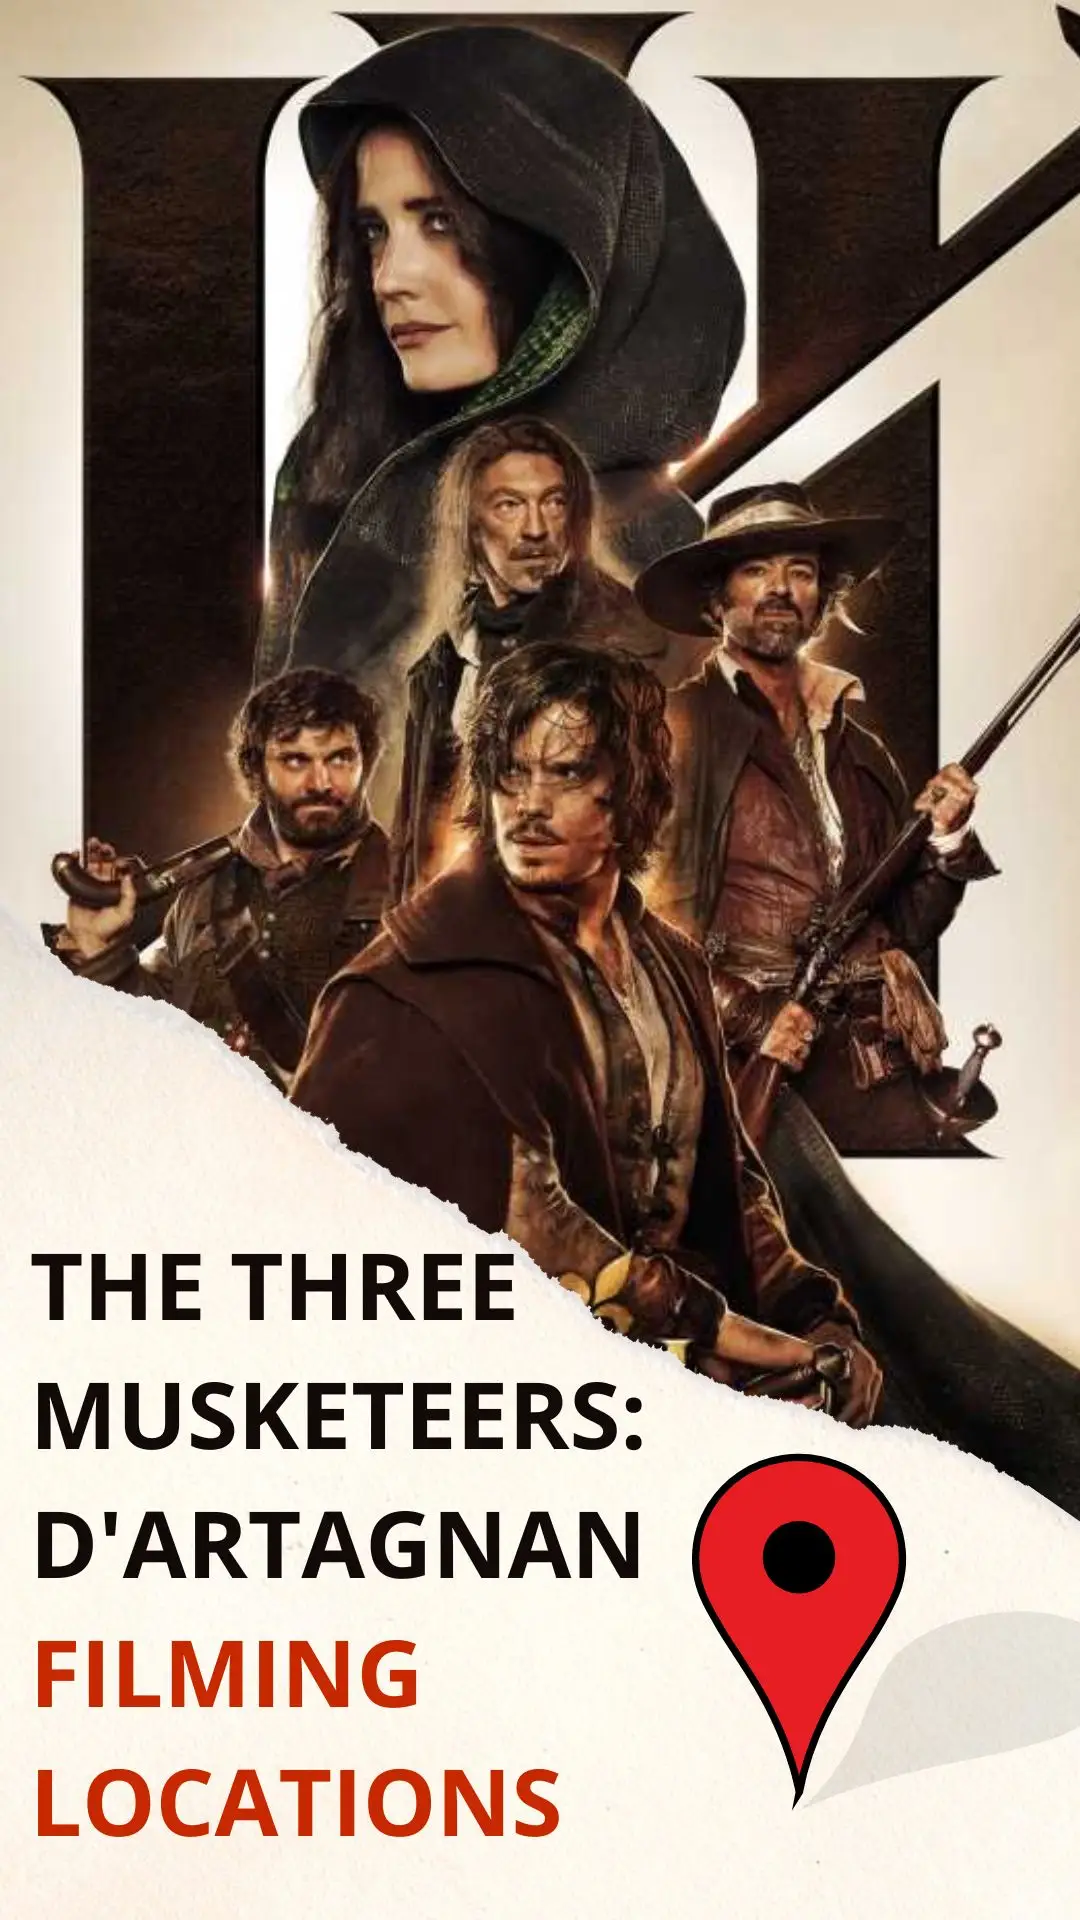 The Three Musketeers: D'Artagnan Filming Locations